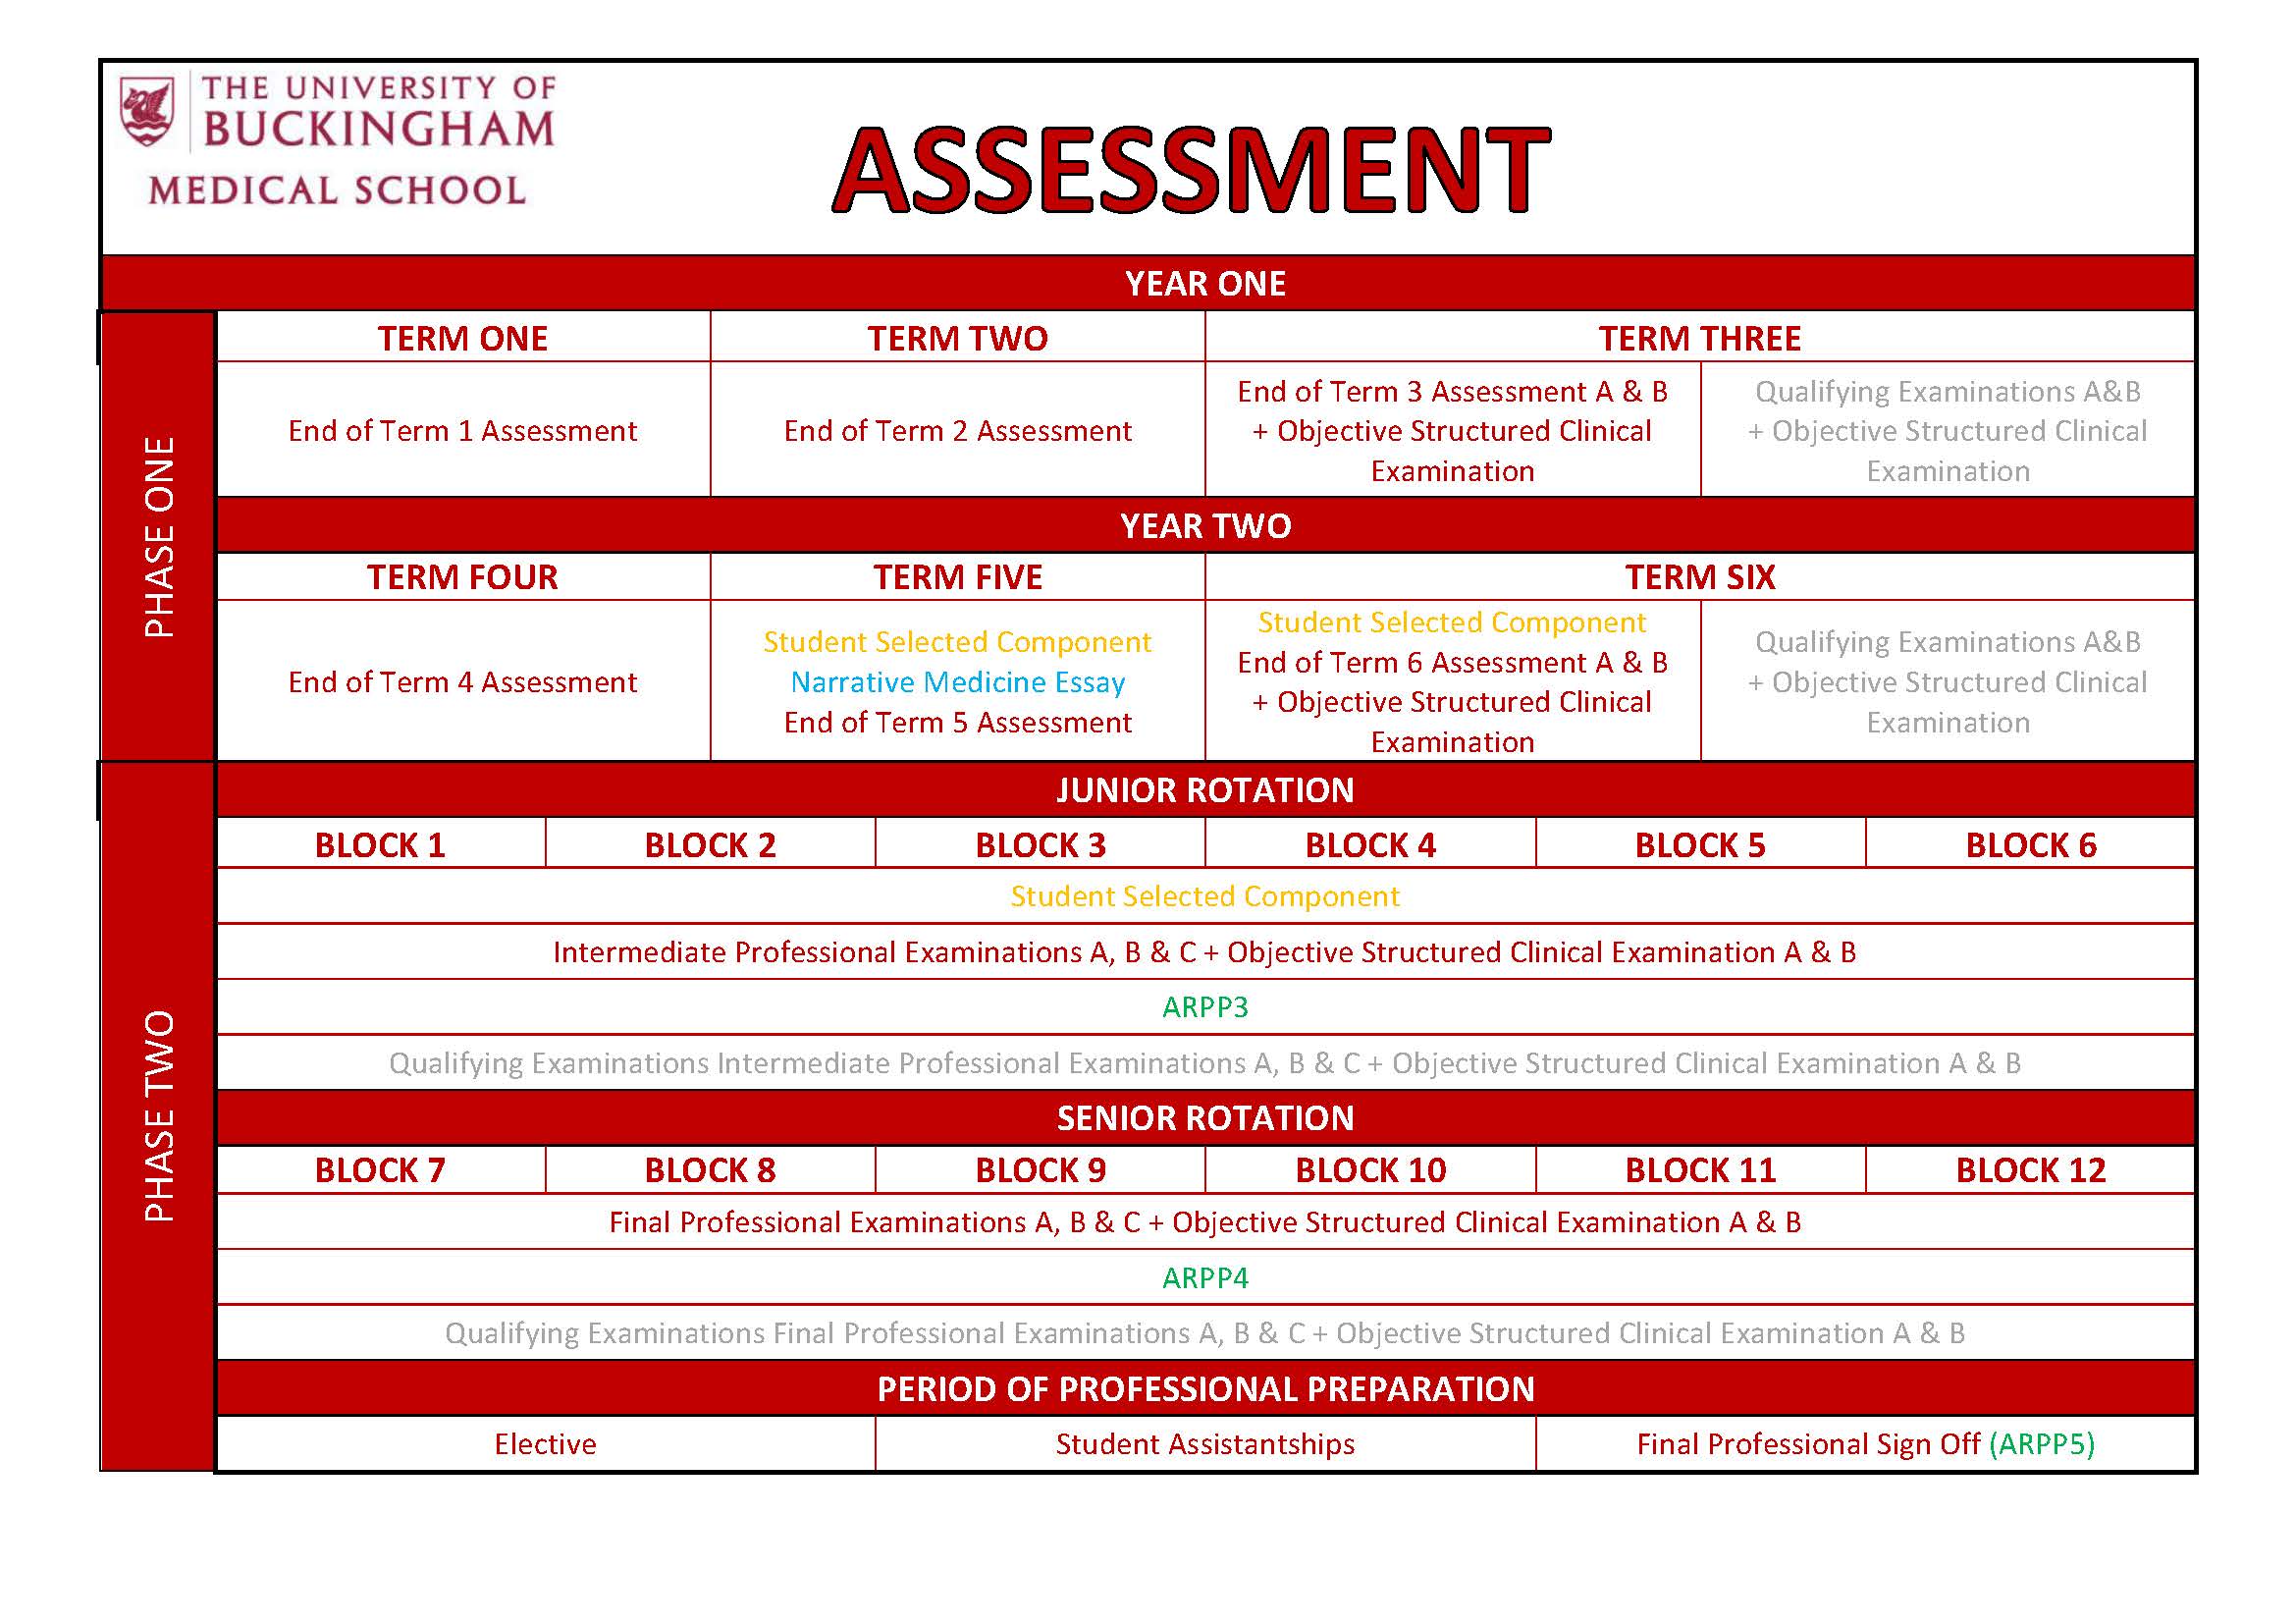 Assessment Overview